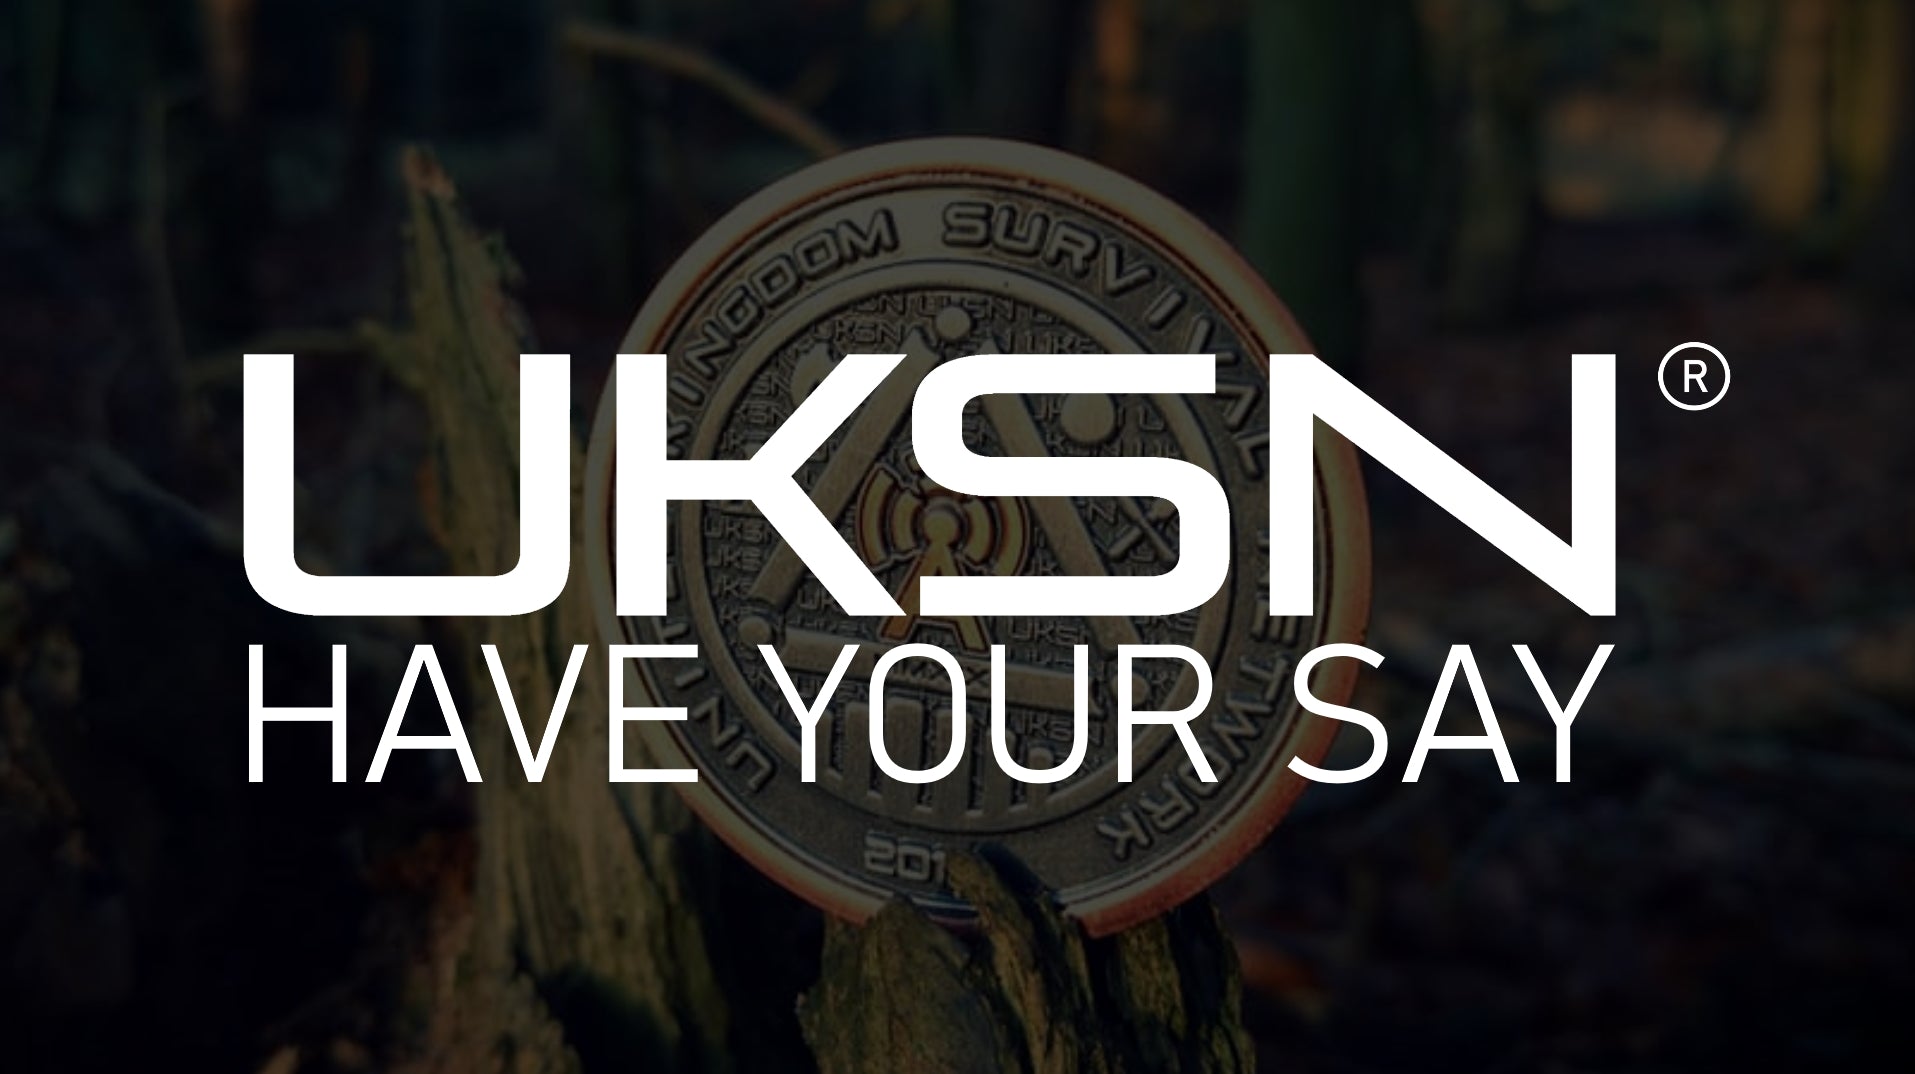 Calling All Members: What Merchandise Would You Like to See at UKSN?